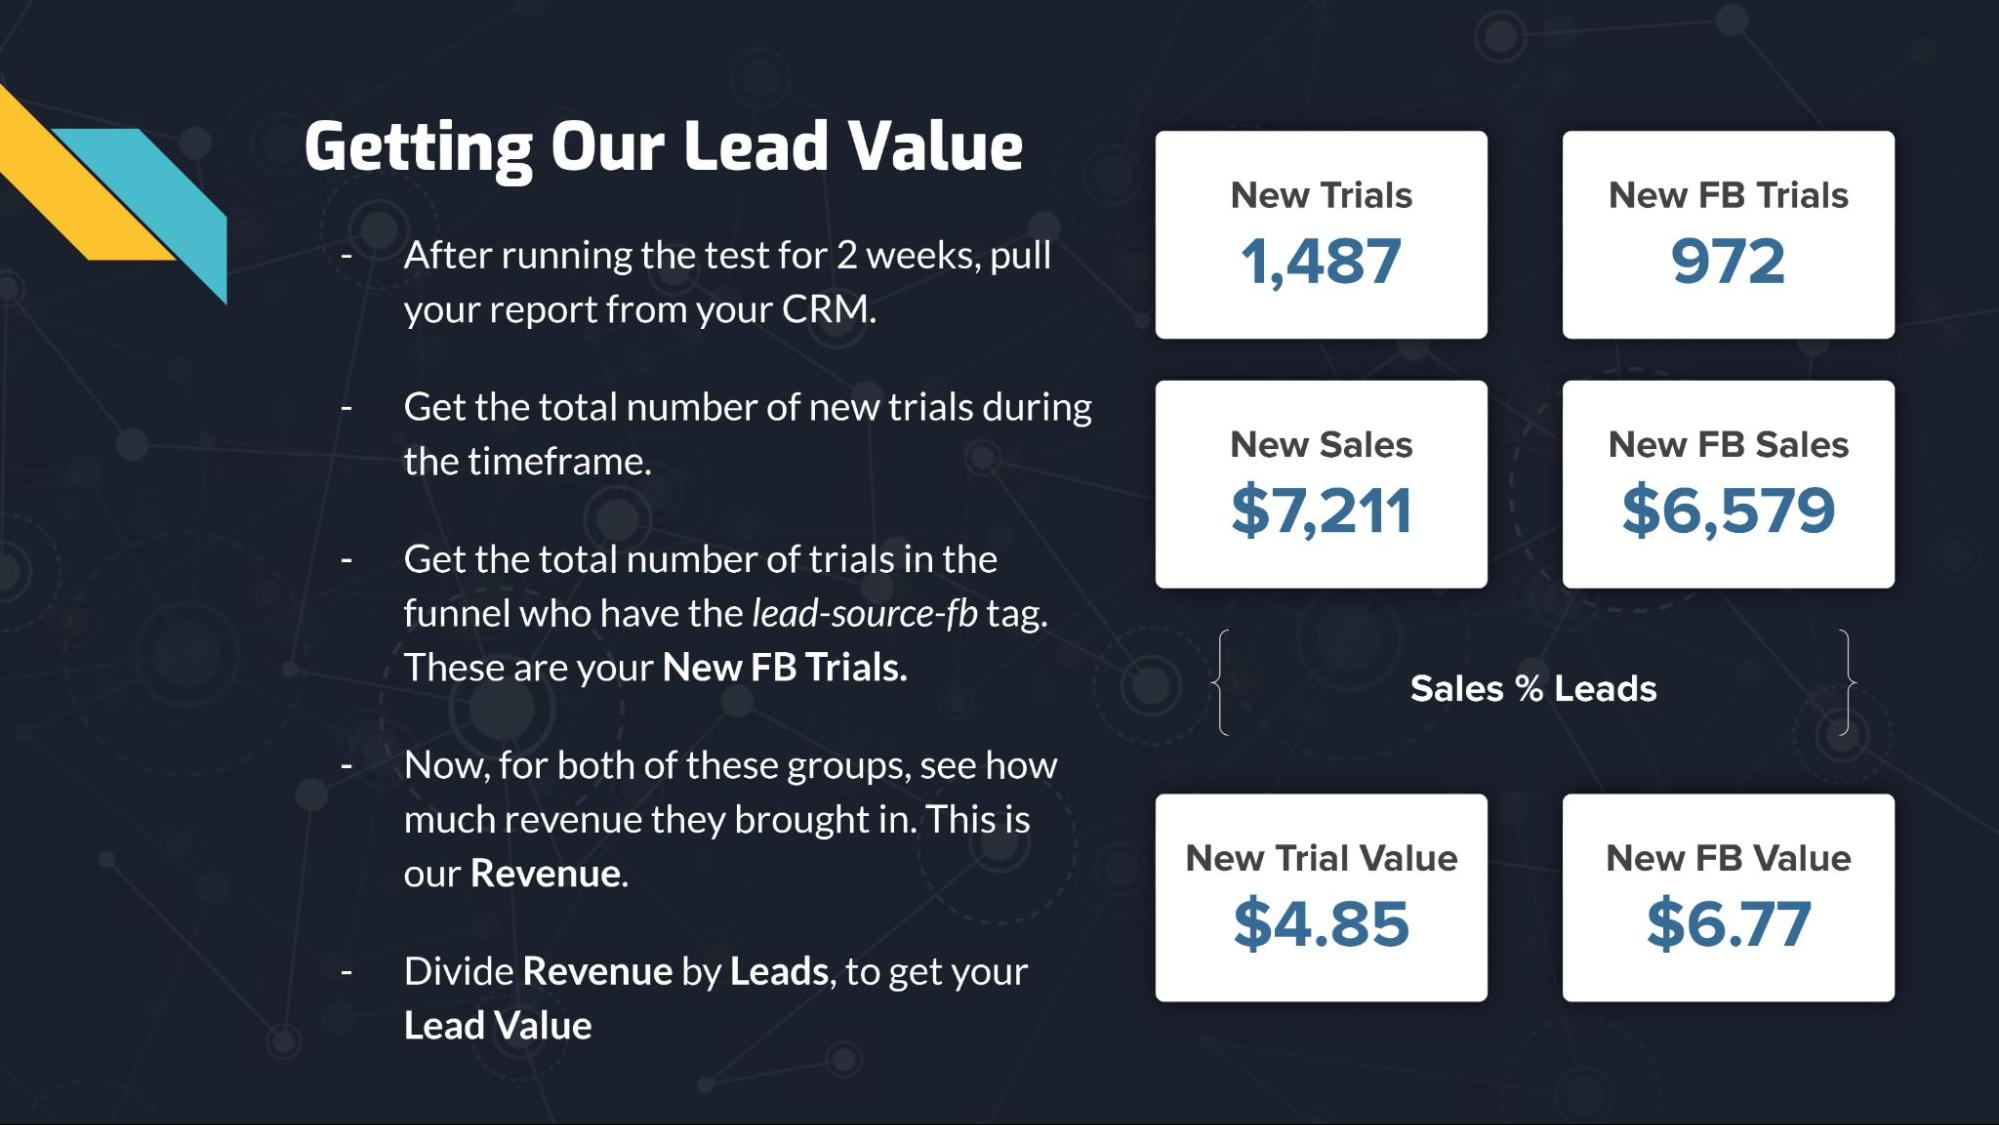 Using Segments to Optimize Customer Value: A slide showing an experiment for getting the lead value